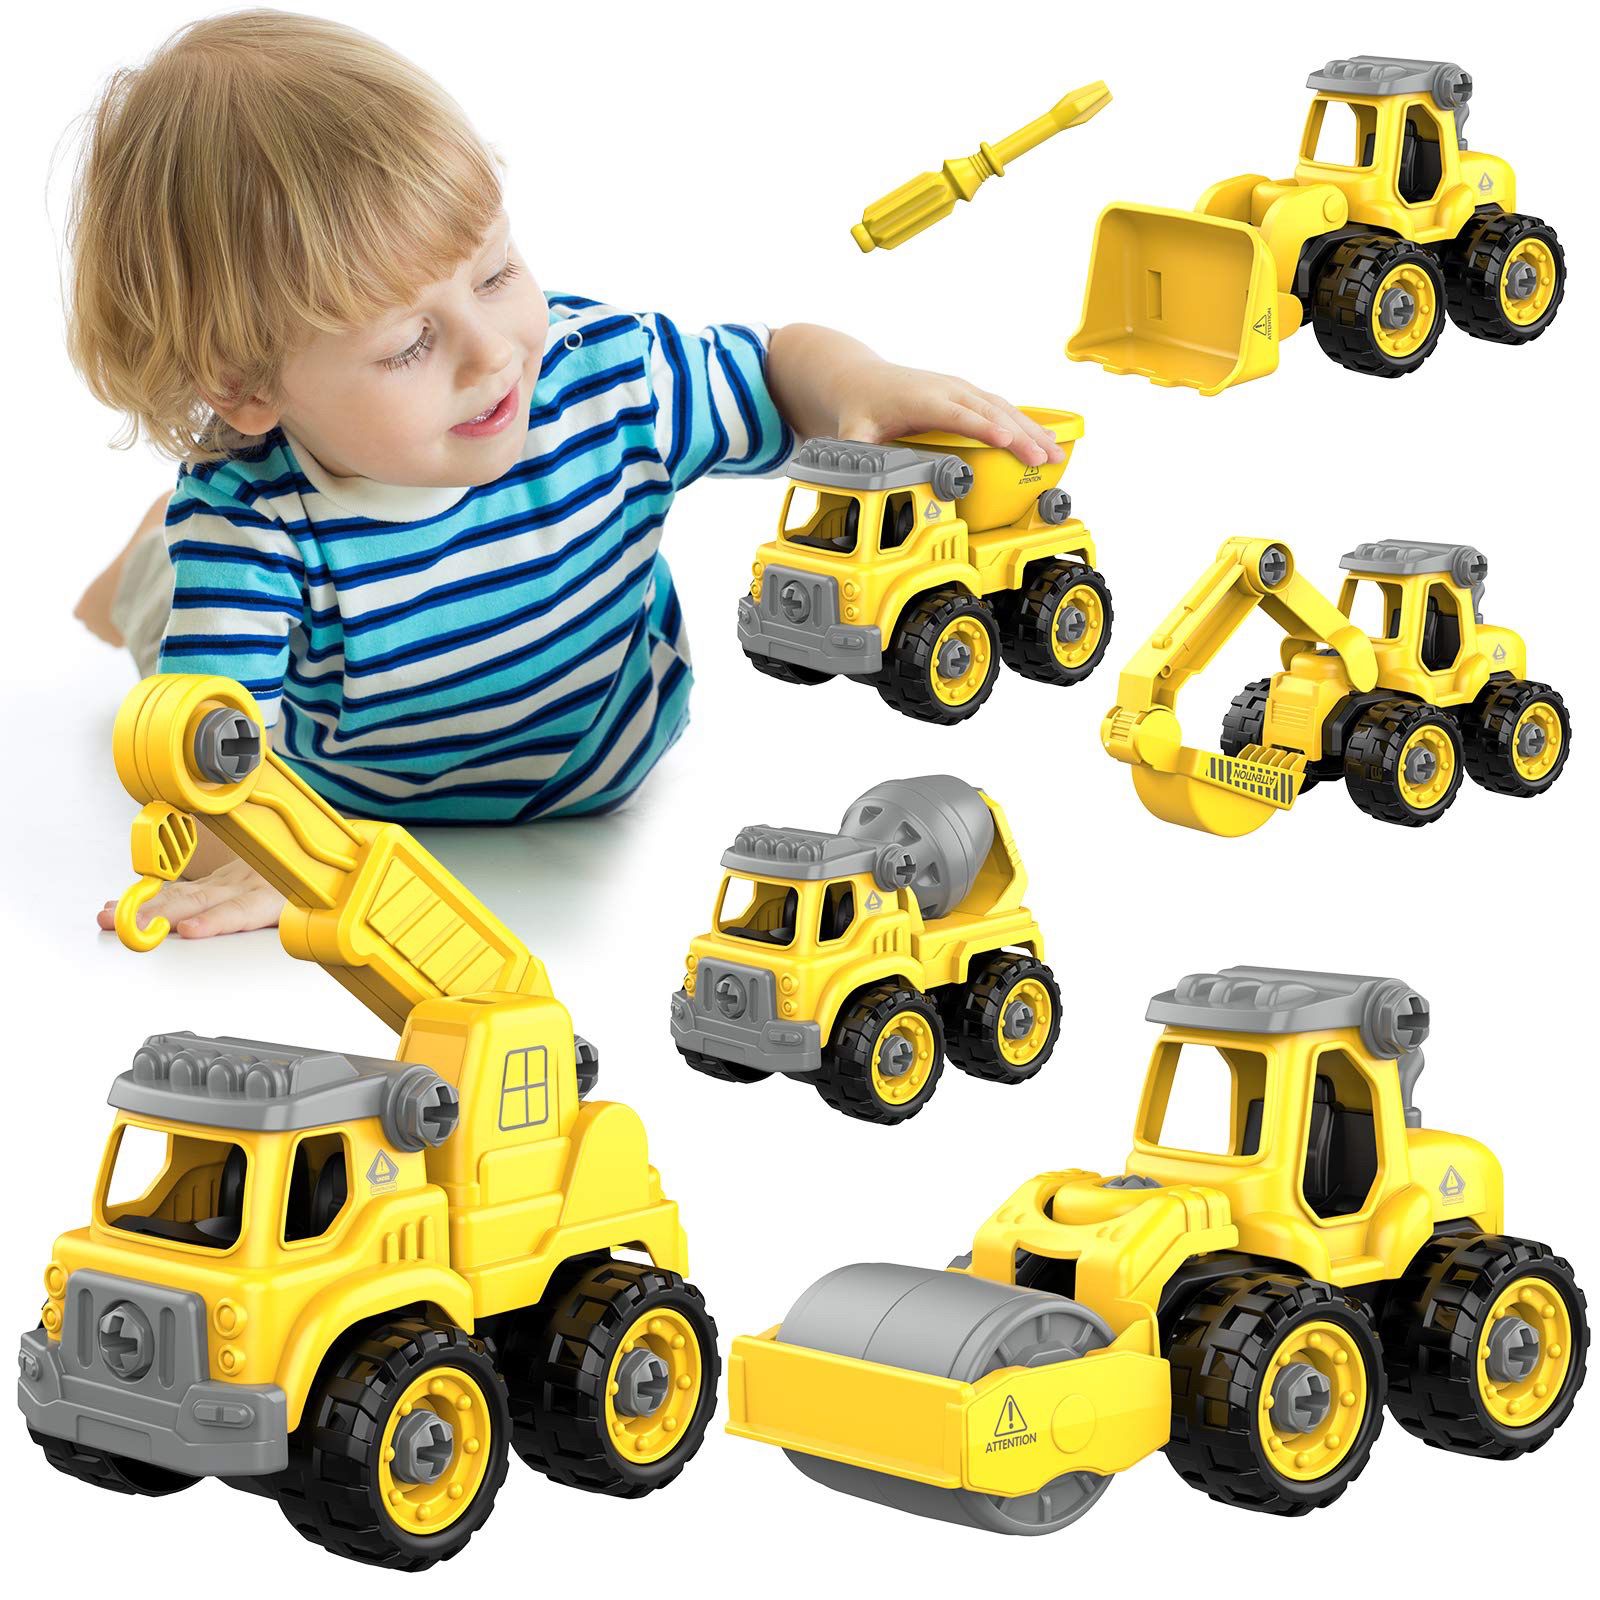 6-in-2 Construction Vehicle Toys, Kids DIY Take Apart Truck Set, Best Vehicle Toys for 3-6 Boys Girls Toddler with Cement Mixer/Sand Truck, Crane Mach